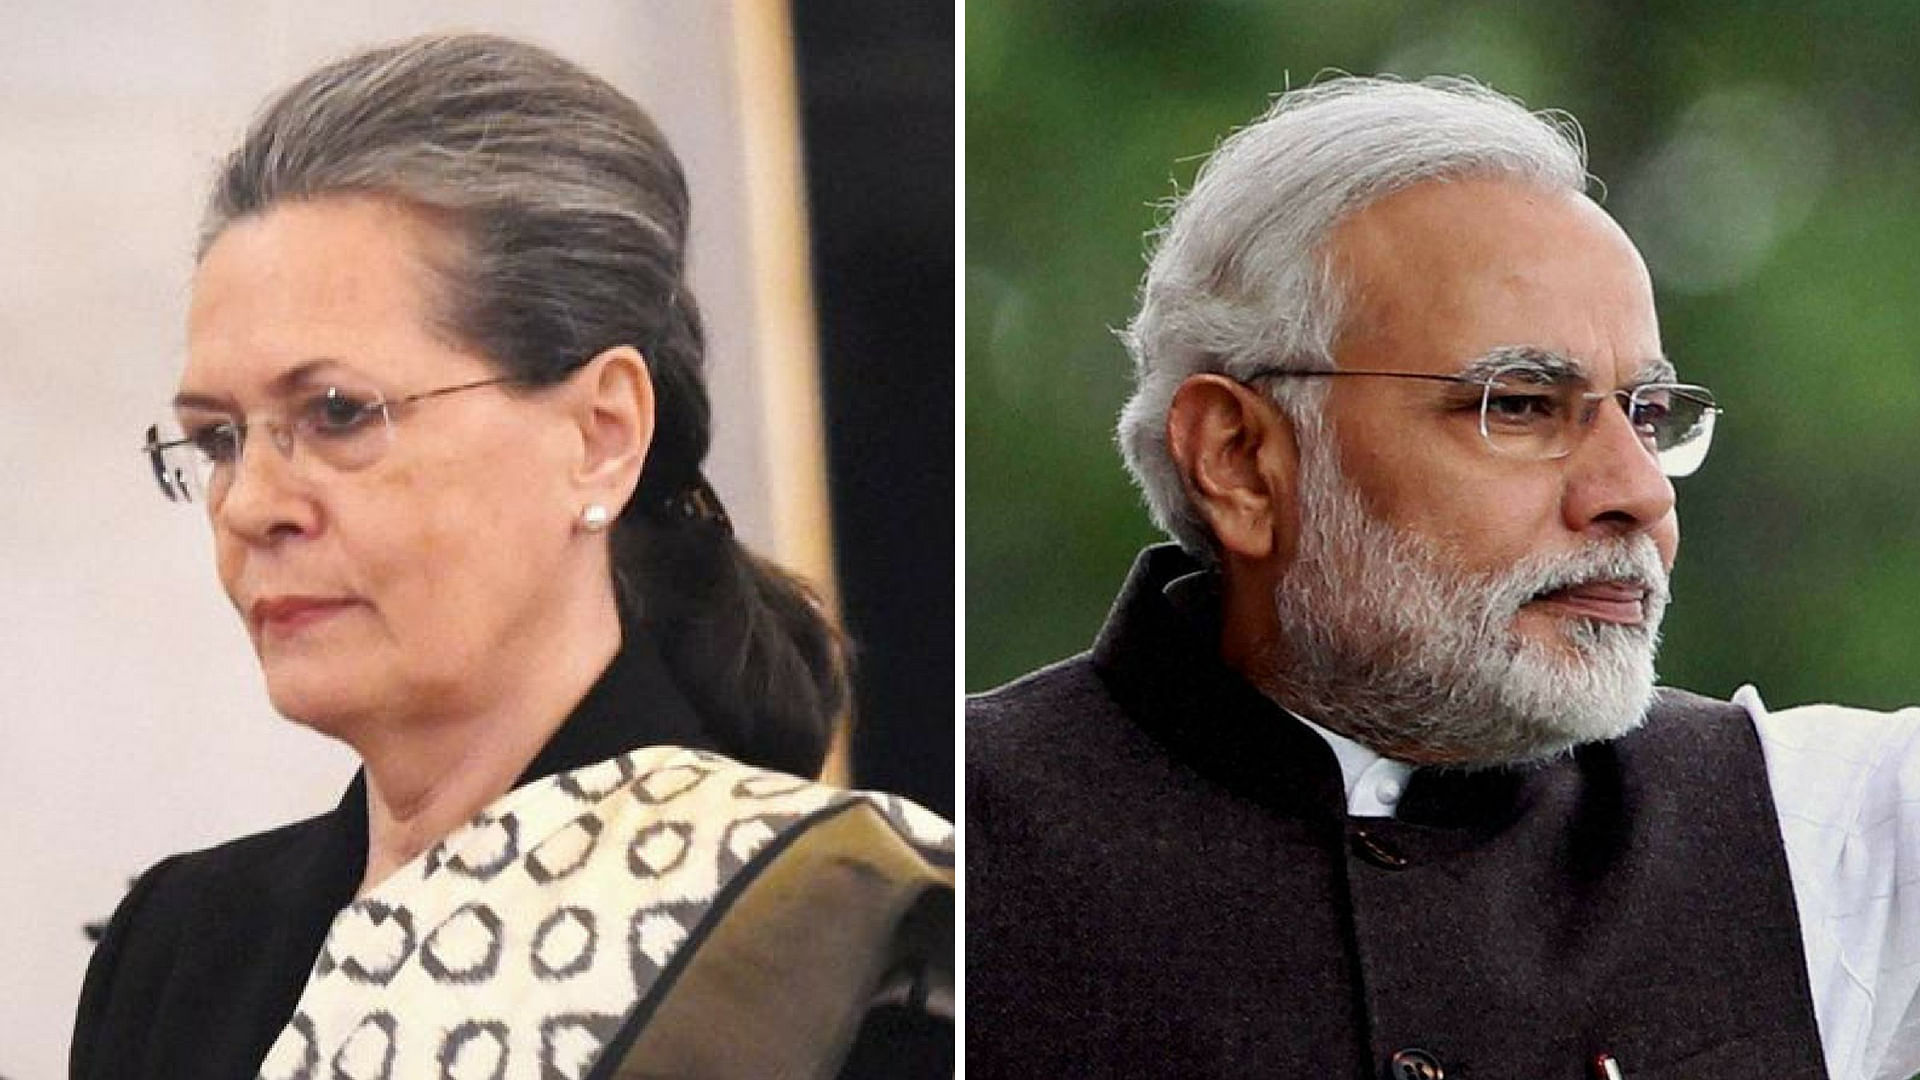 File image of UPA chairperson Sonia Gandhi and Prime Minister Narendra Modi.